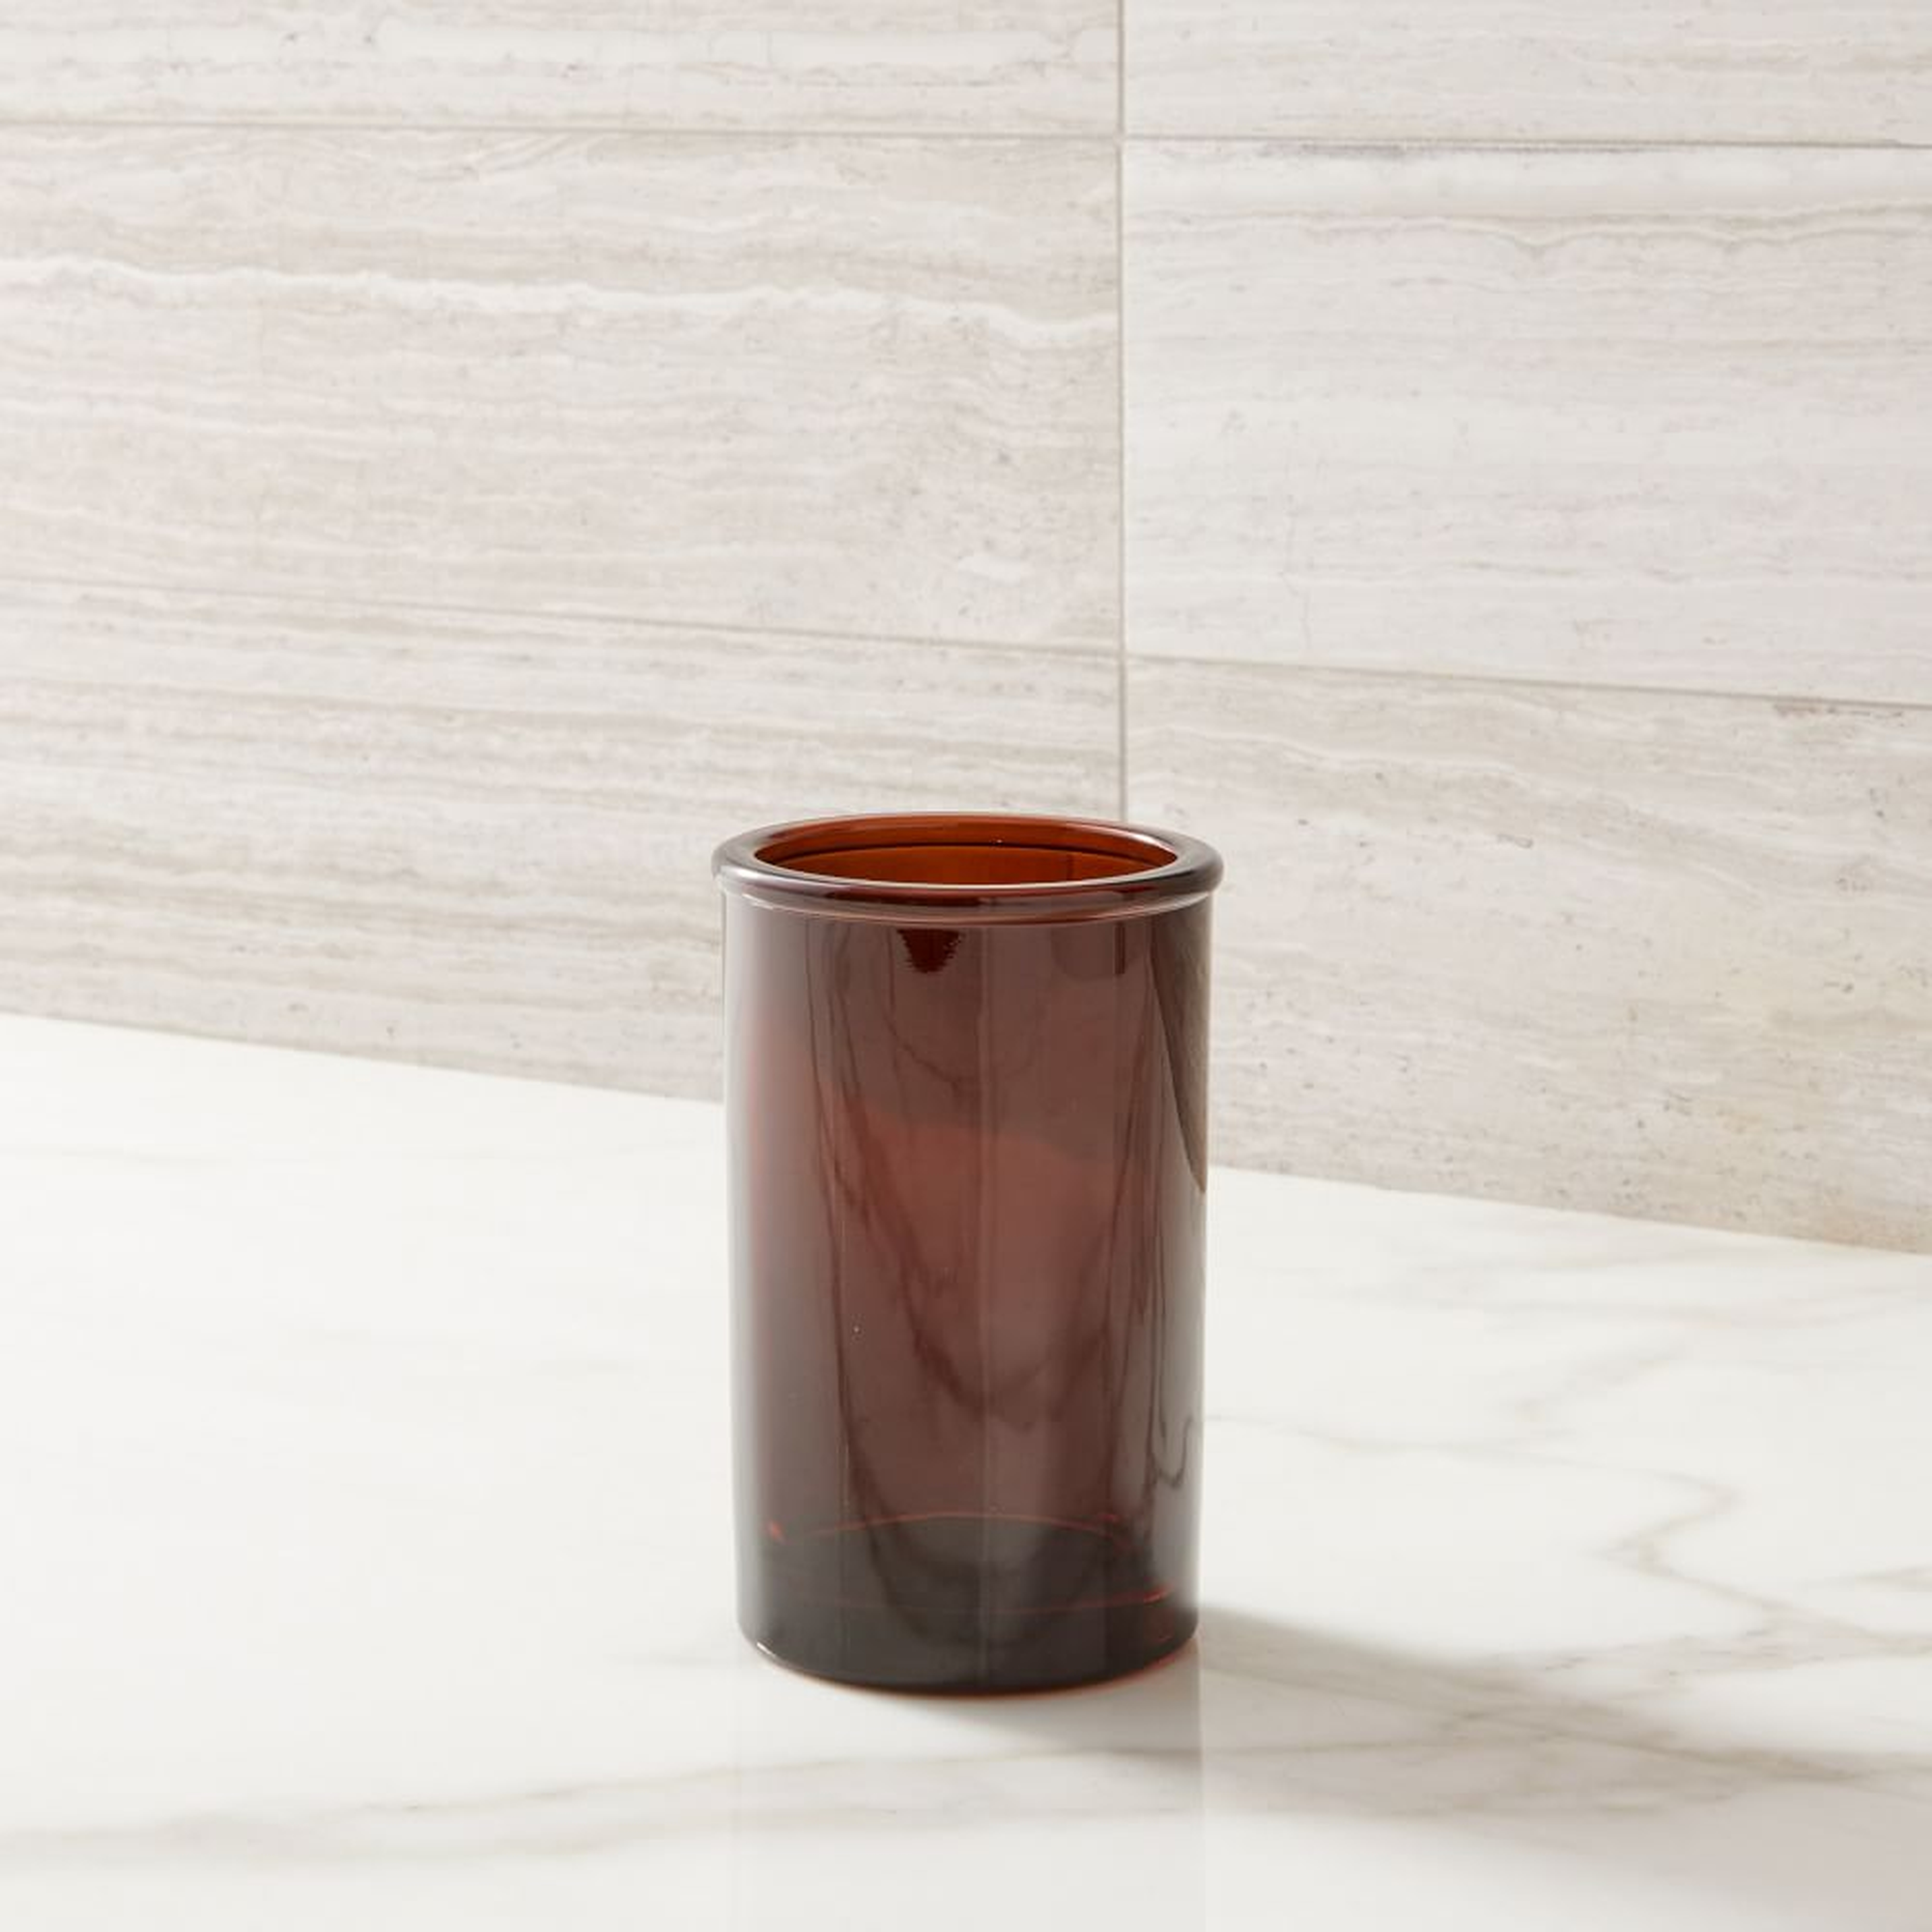 Apothecary Glass Bath Accessories, Amber, Toothbrush Holder - West Elm